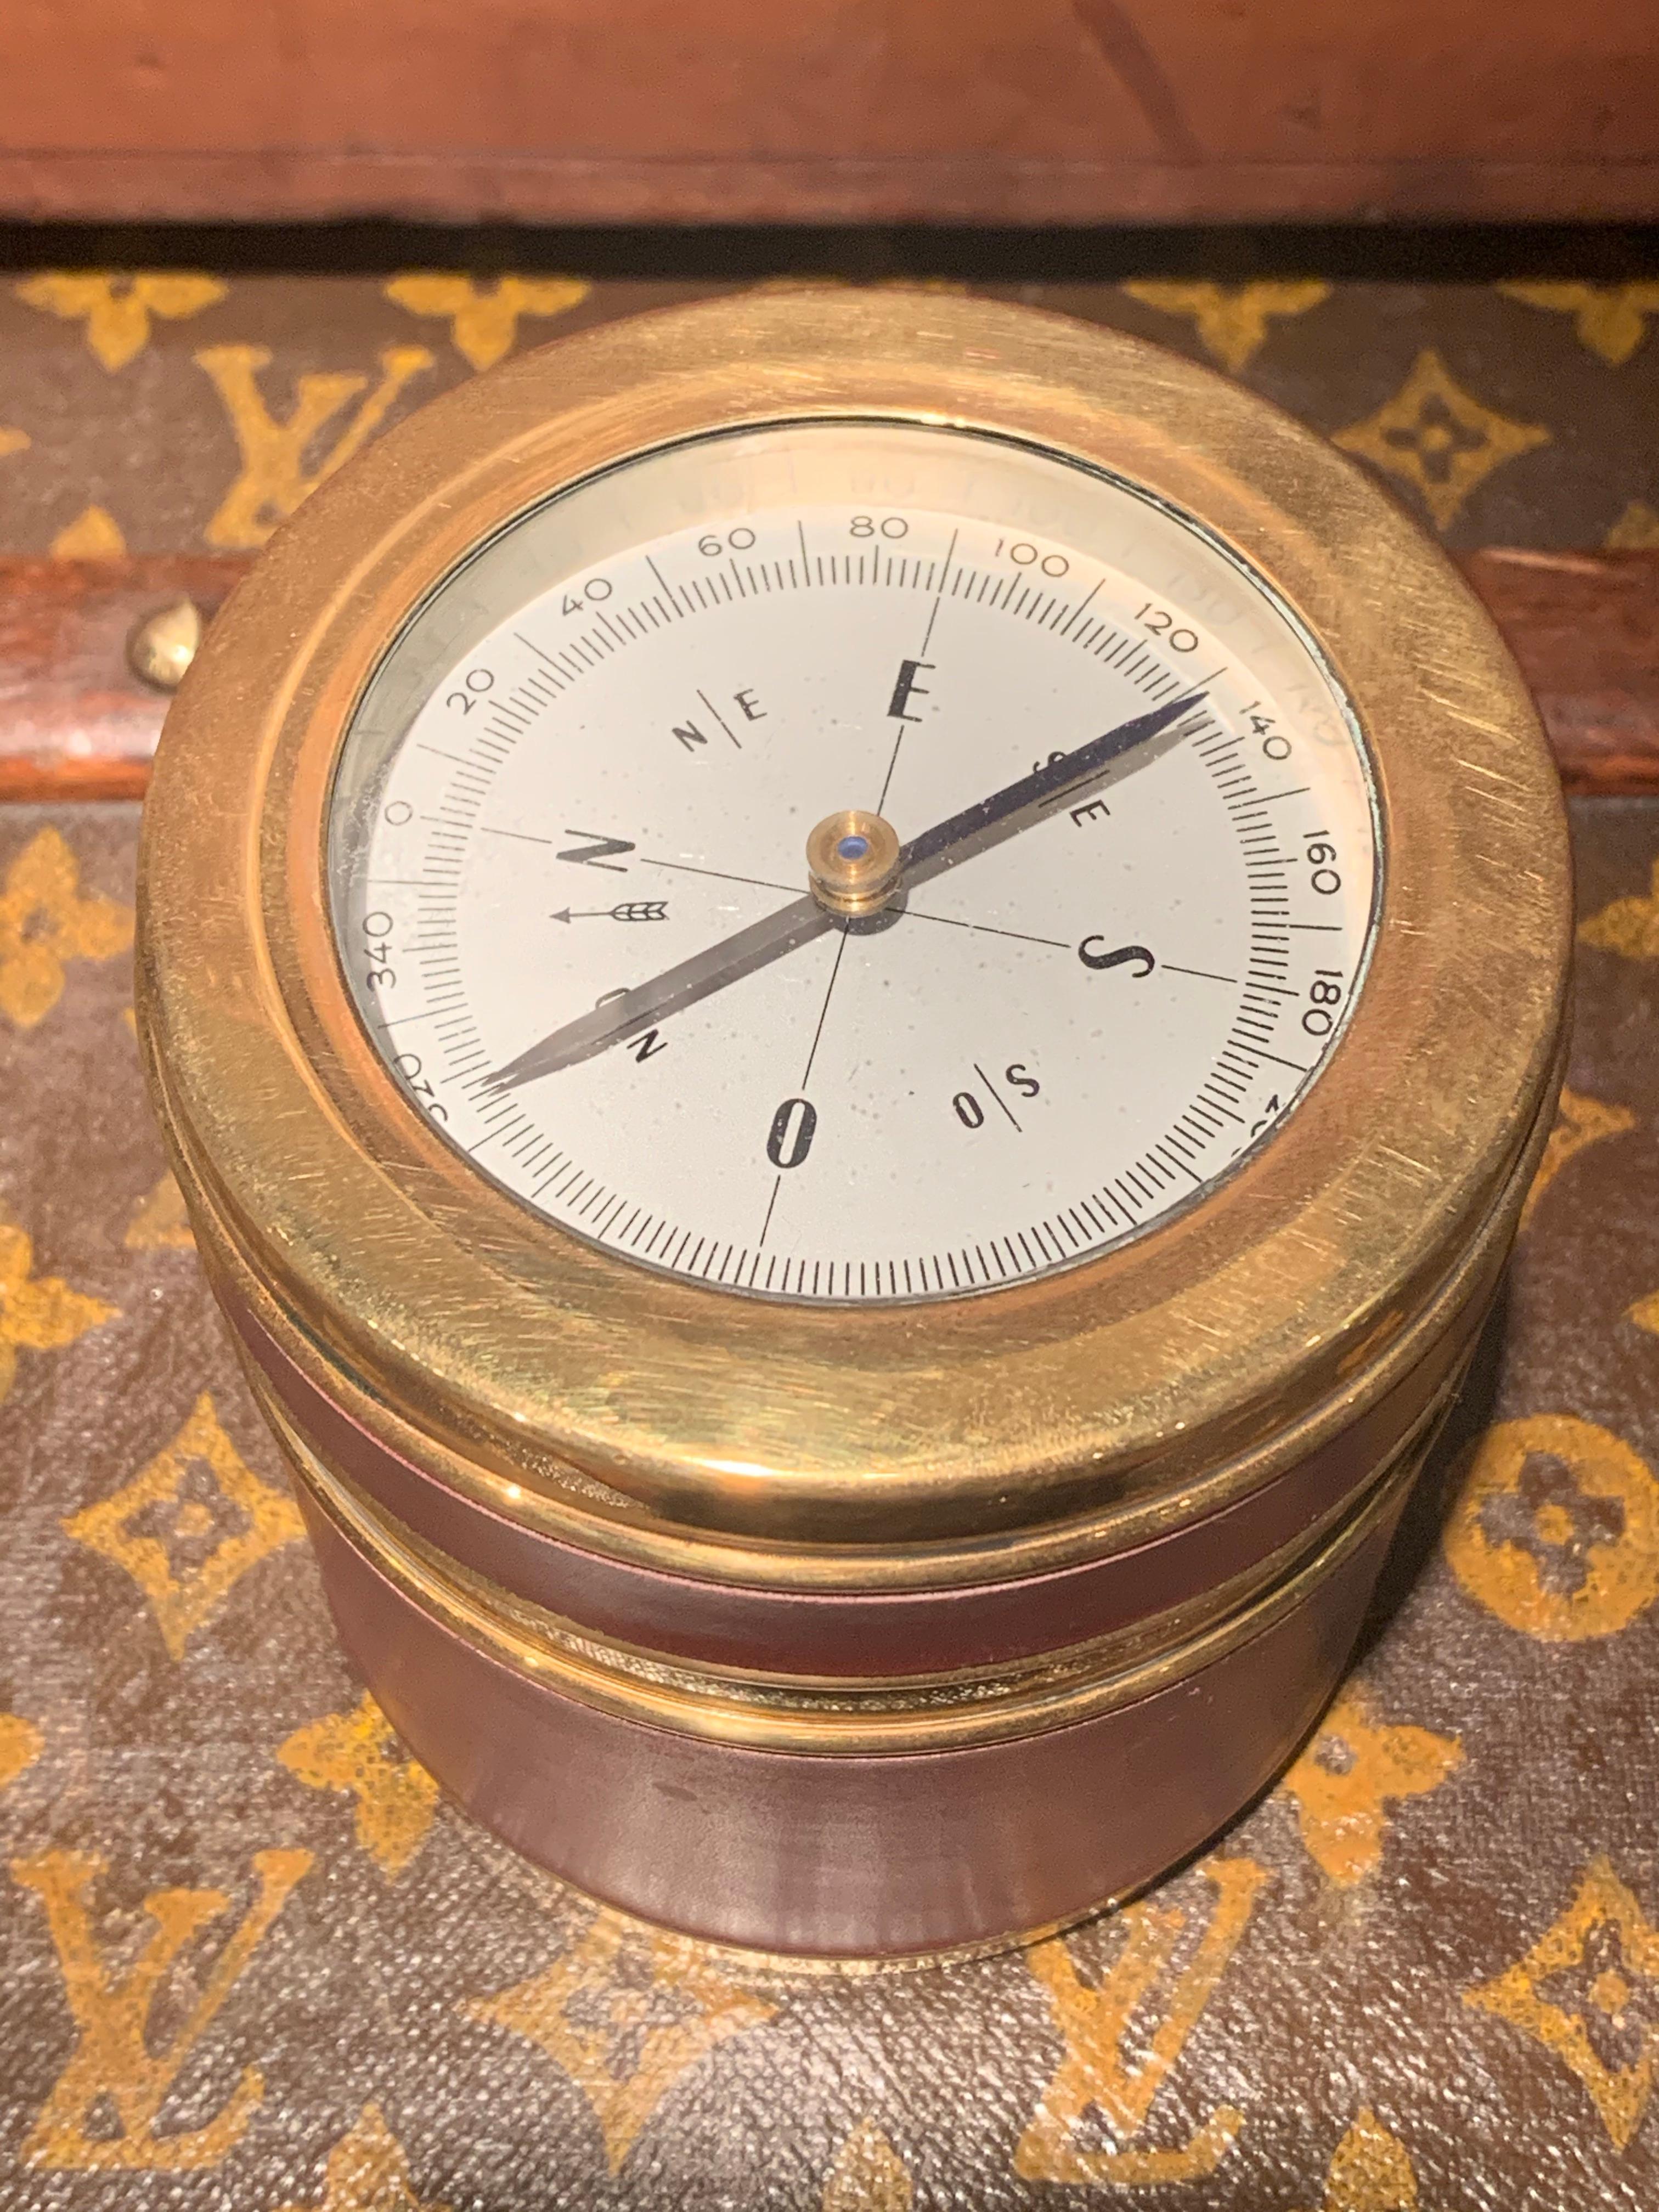 1960s Hermès Cigarette Compass Box (signed “Hermès Paris” at the bottom of the box)

A Compass is attached to the lid.
The inside of the Box contain a brass removable cigarette partition.
The box exterior is in Brown leather.

Condition: